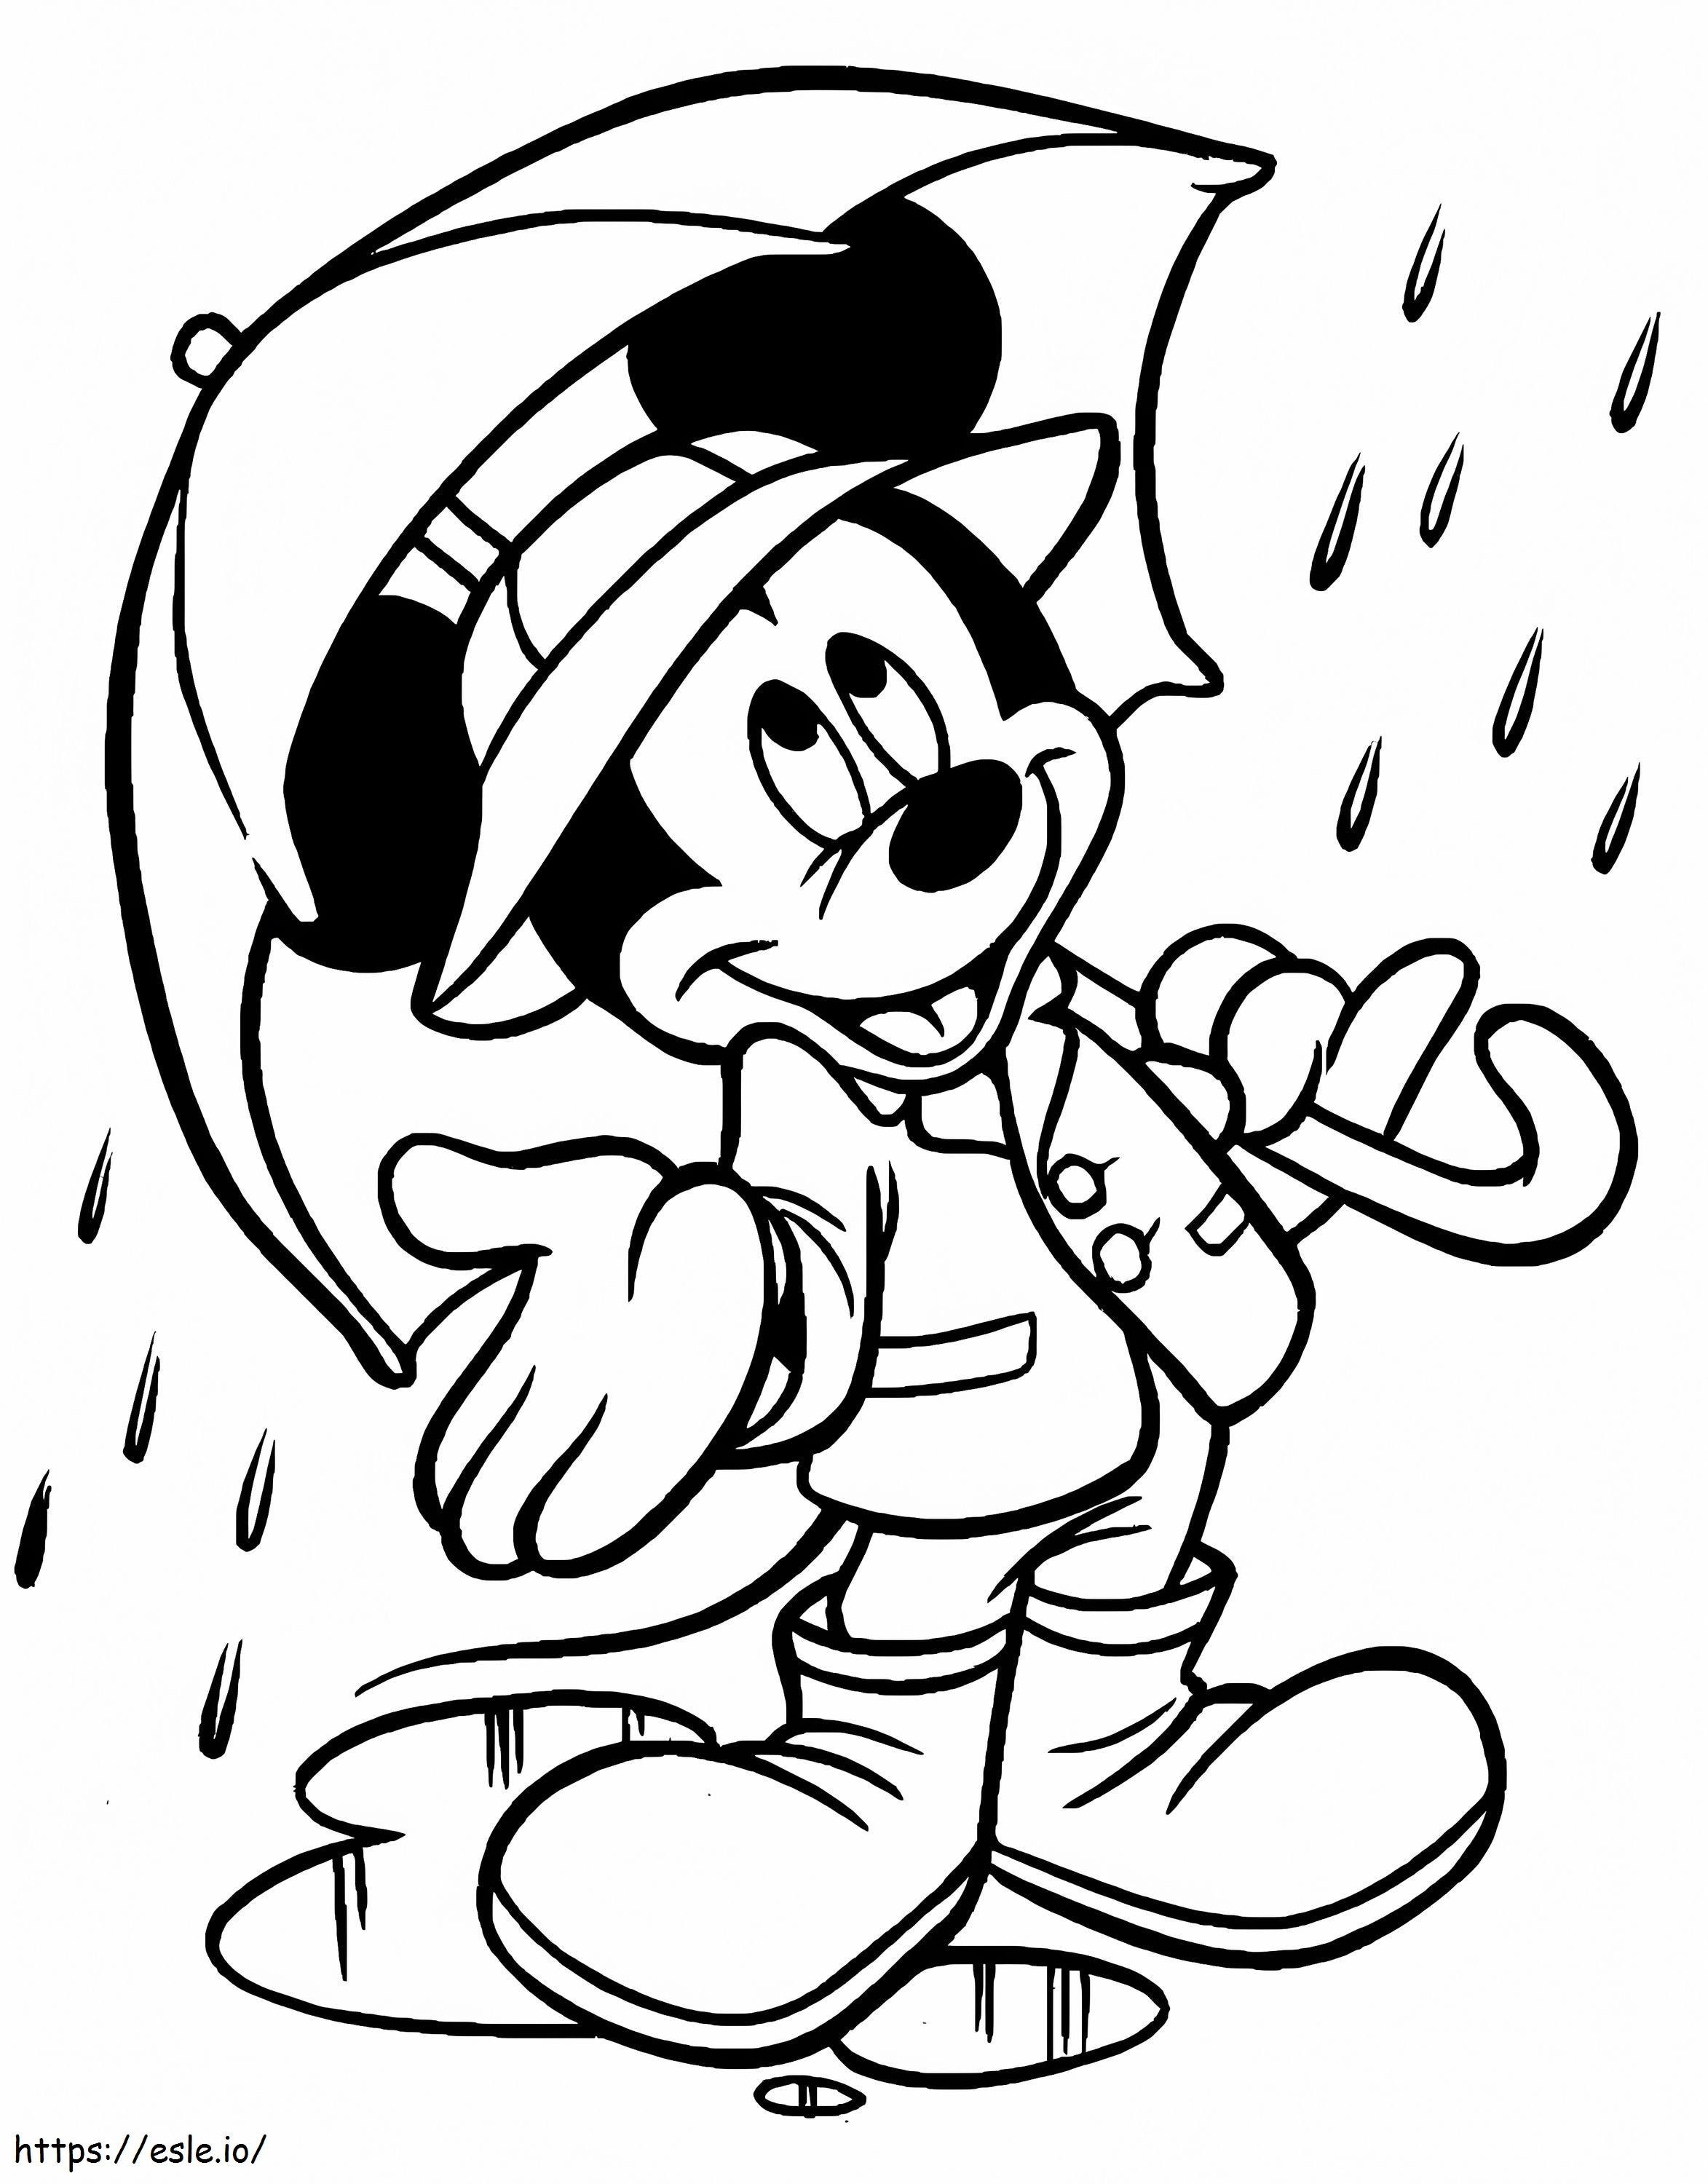 Mickey In Rain coloring page